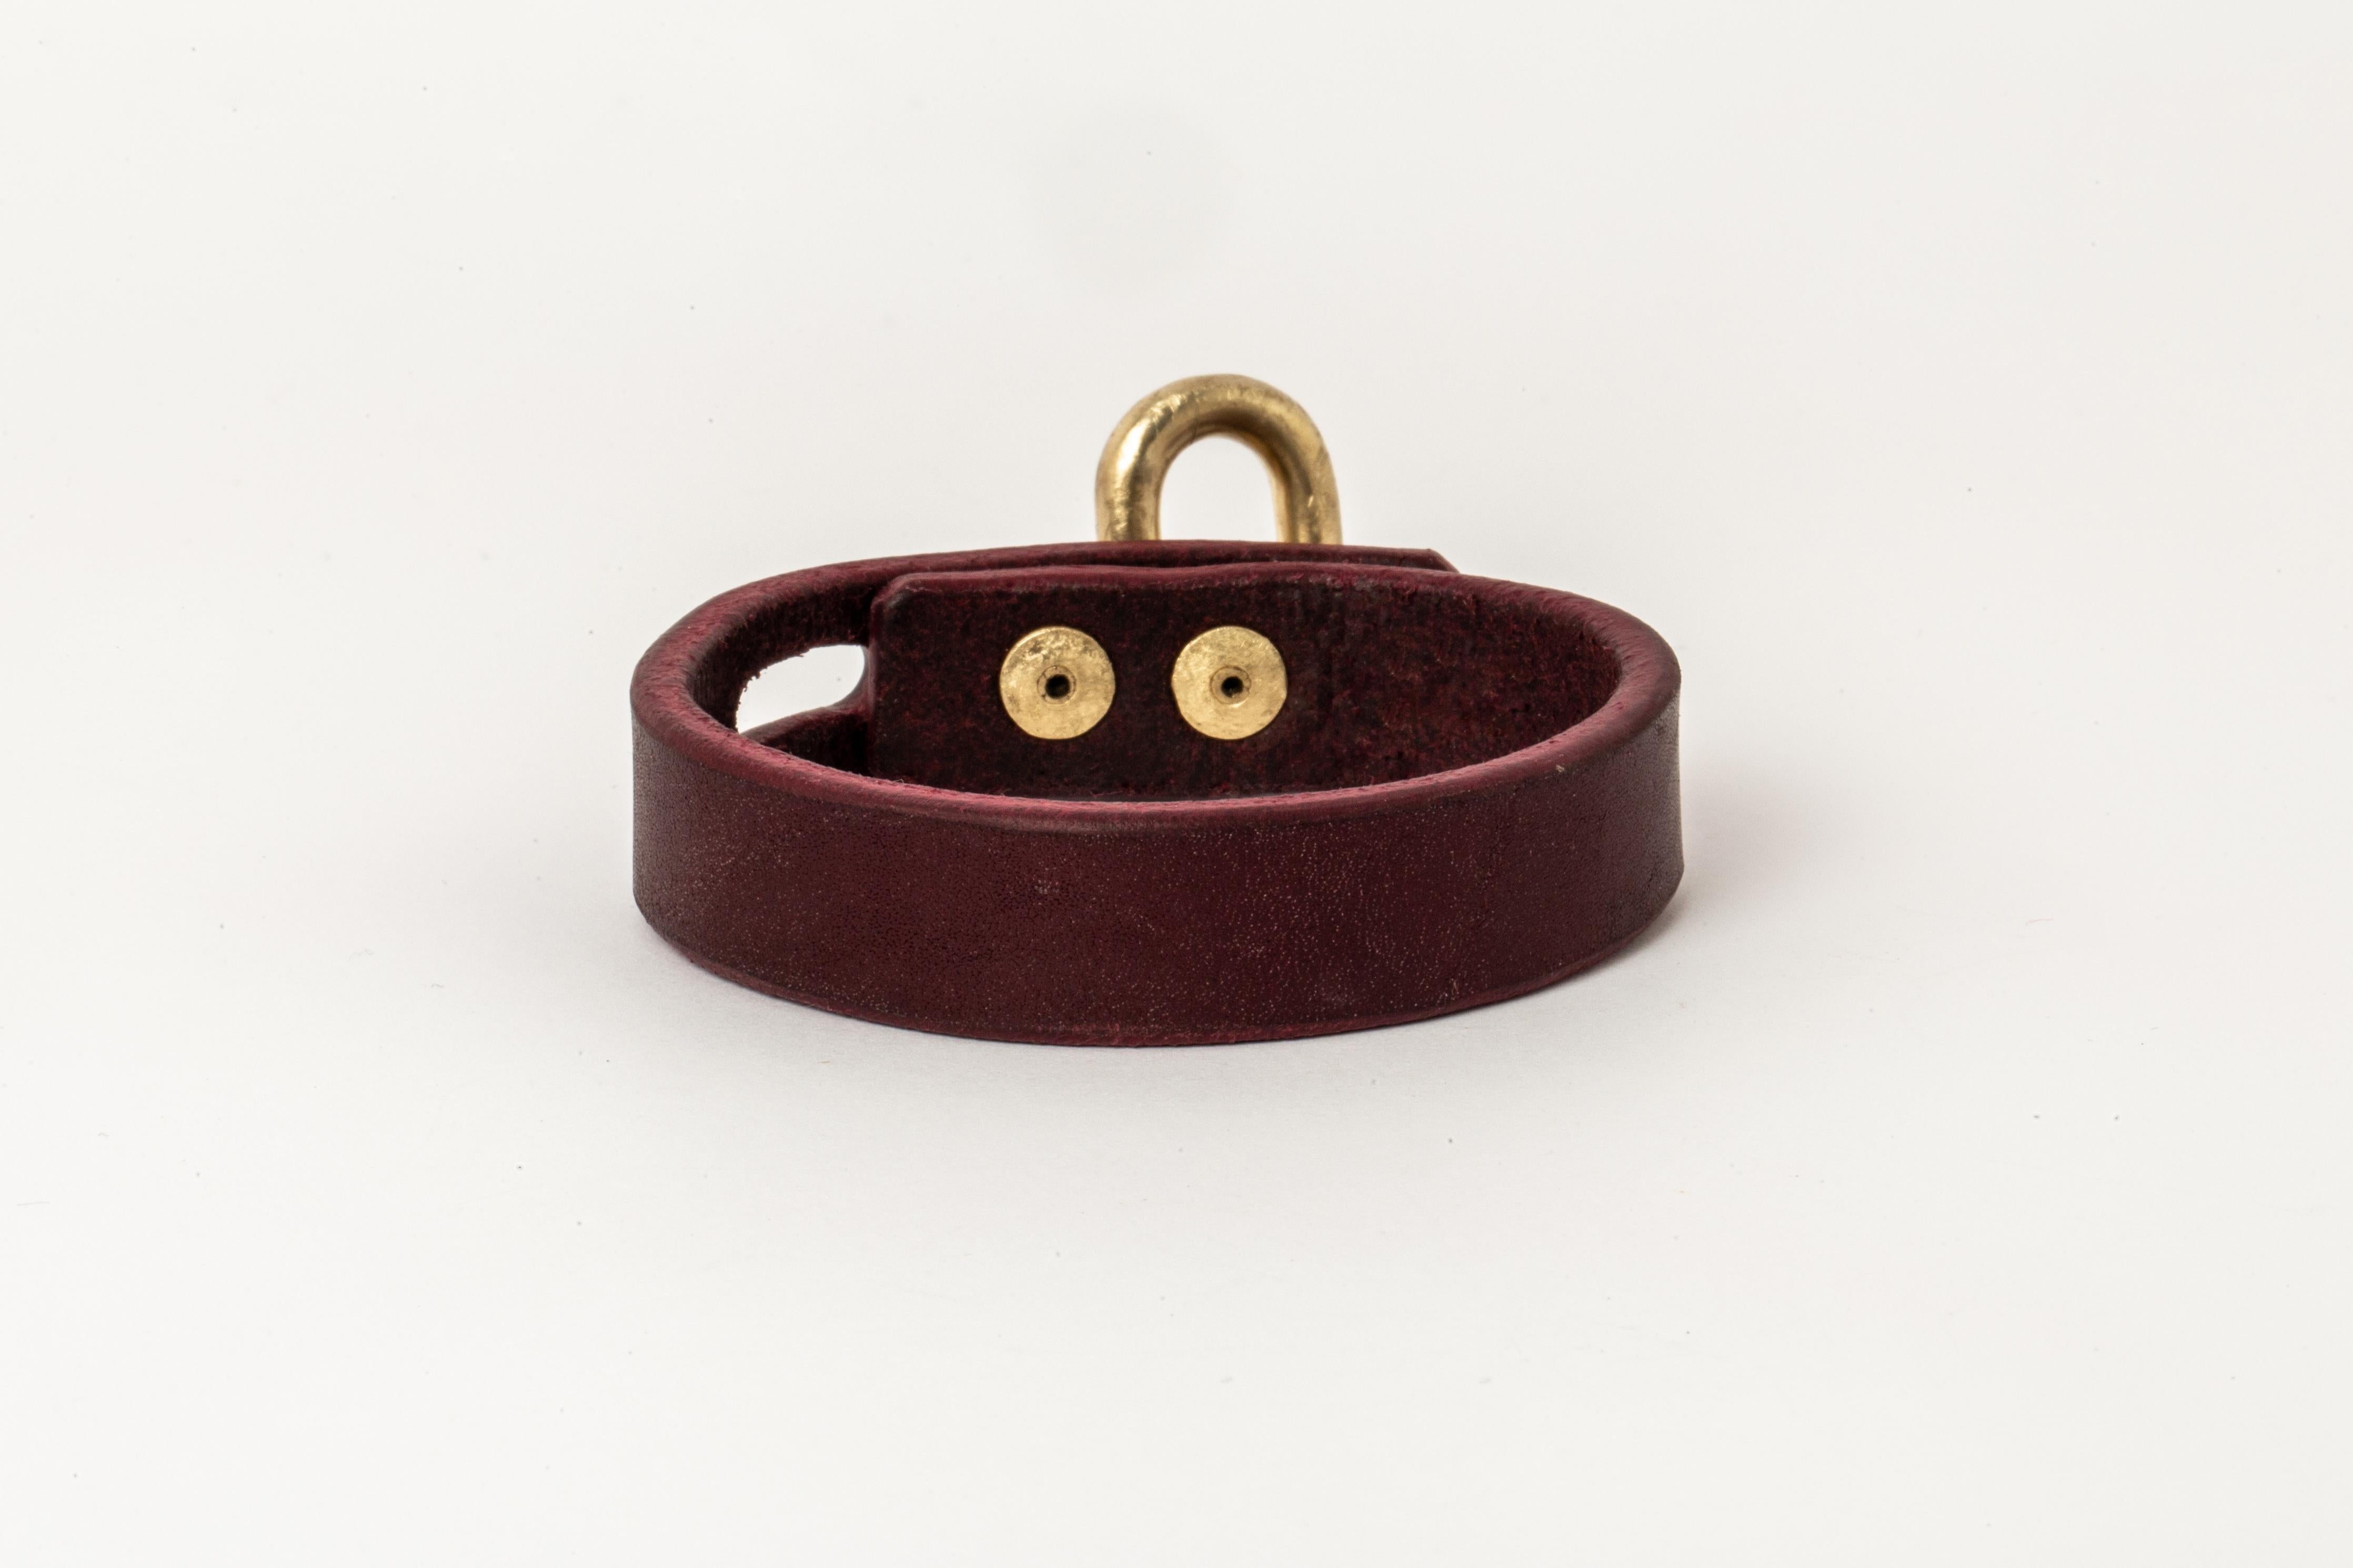 Bracelet in wine buffalo leather and acid treated gold plated brass. Items with the potential use as restraints. All P4X hardware and accessories are compatible and interchangeable. The Charm System is an interrelated group of products that can be